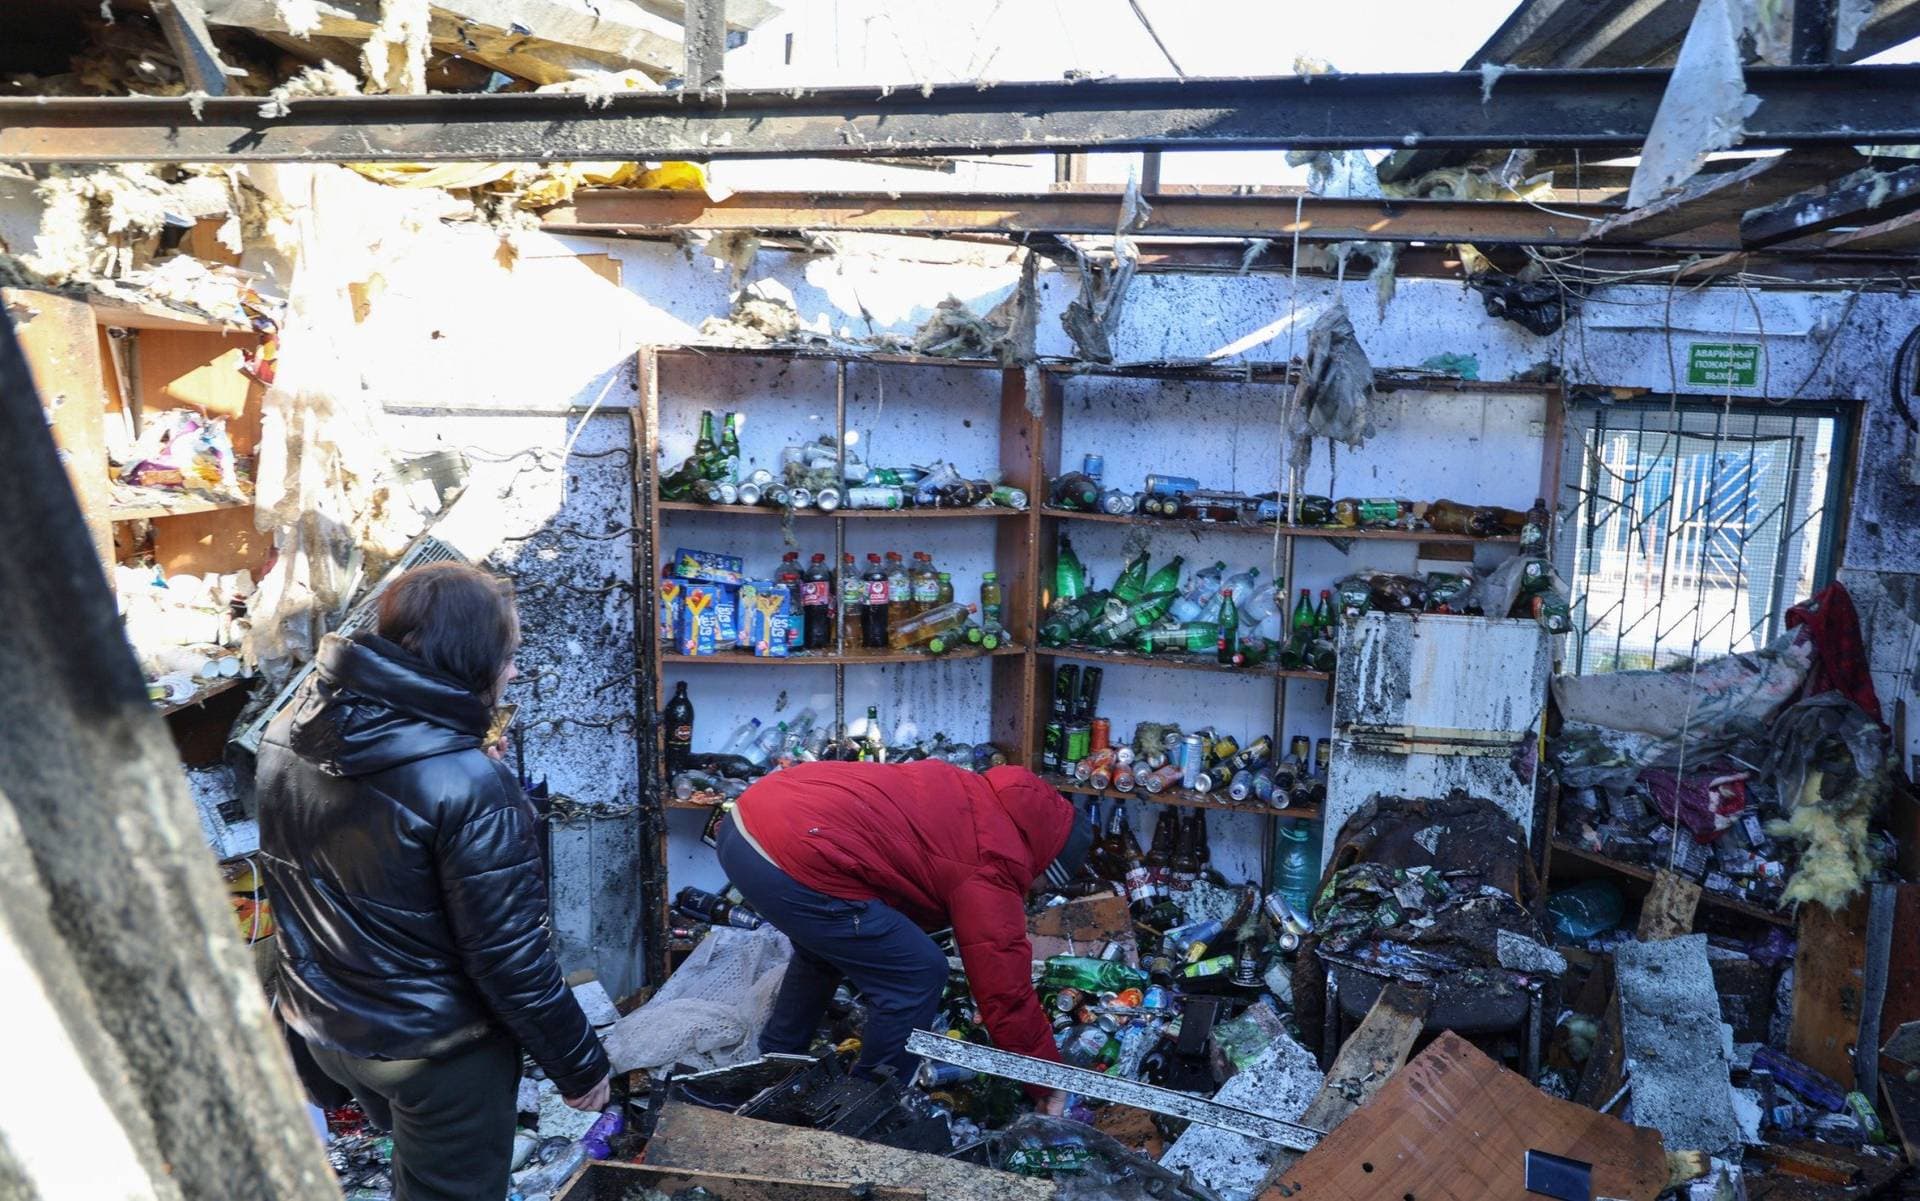 Locals at the scene following the shelling of the food market in Donetsk